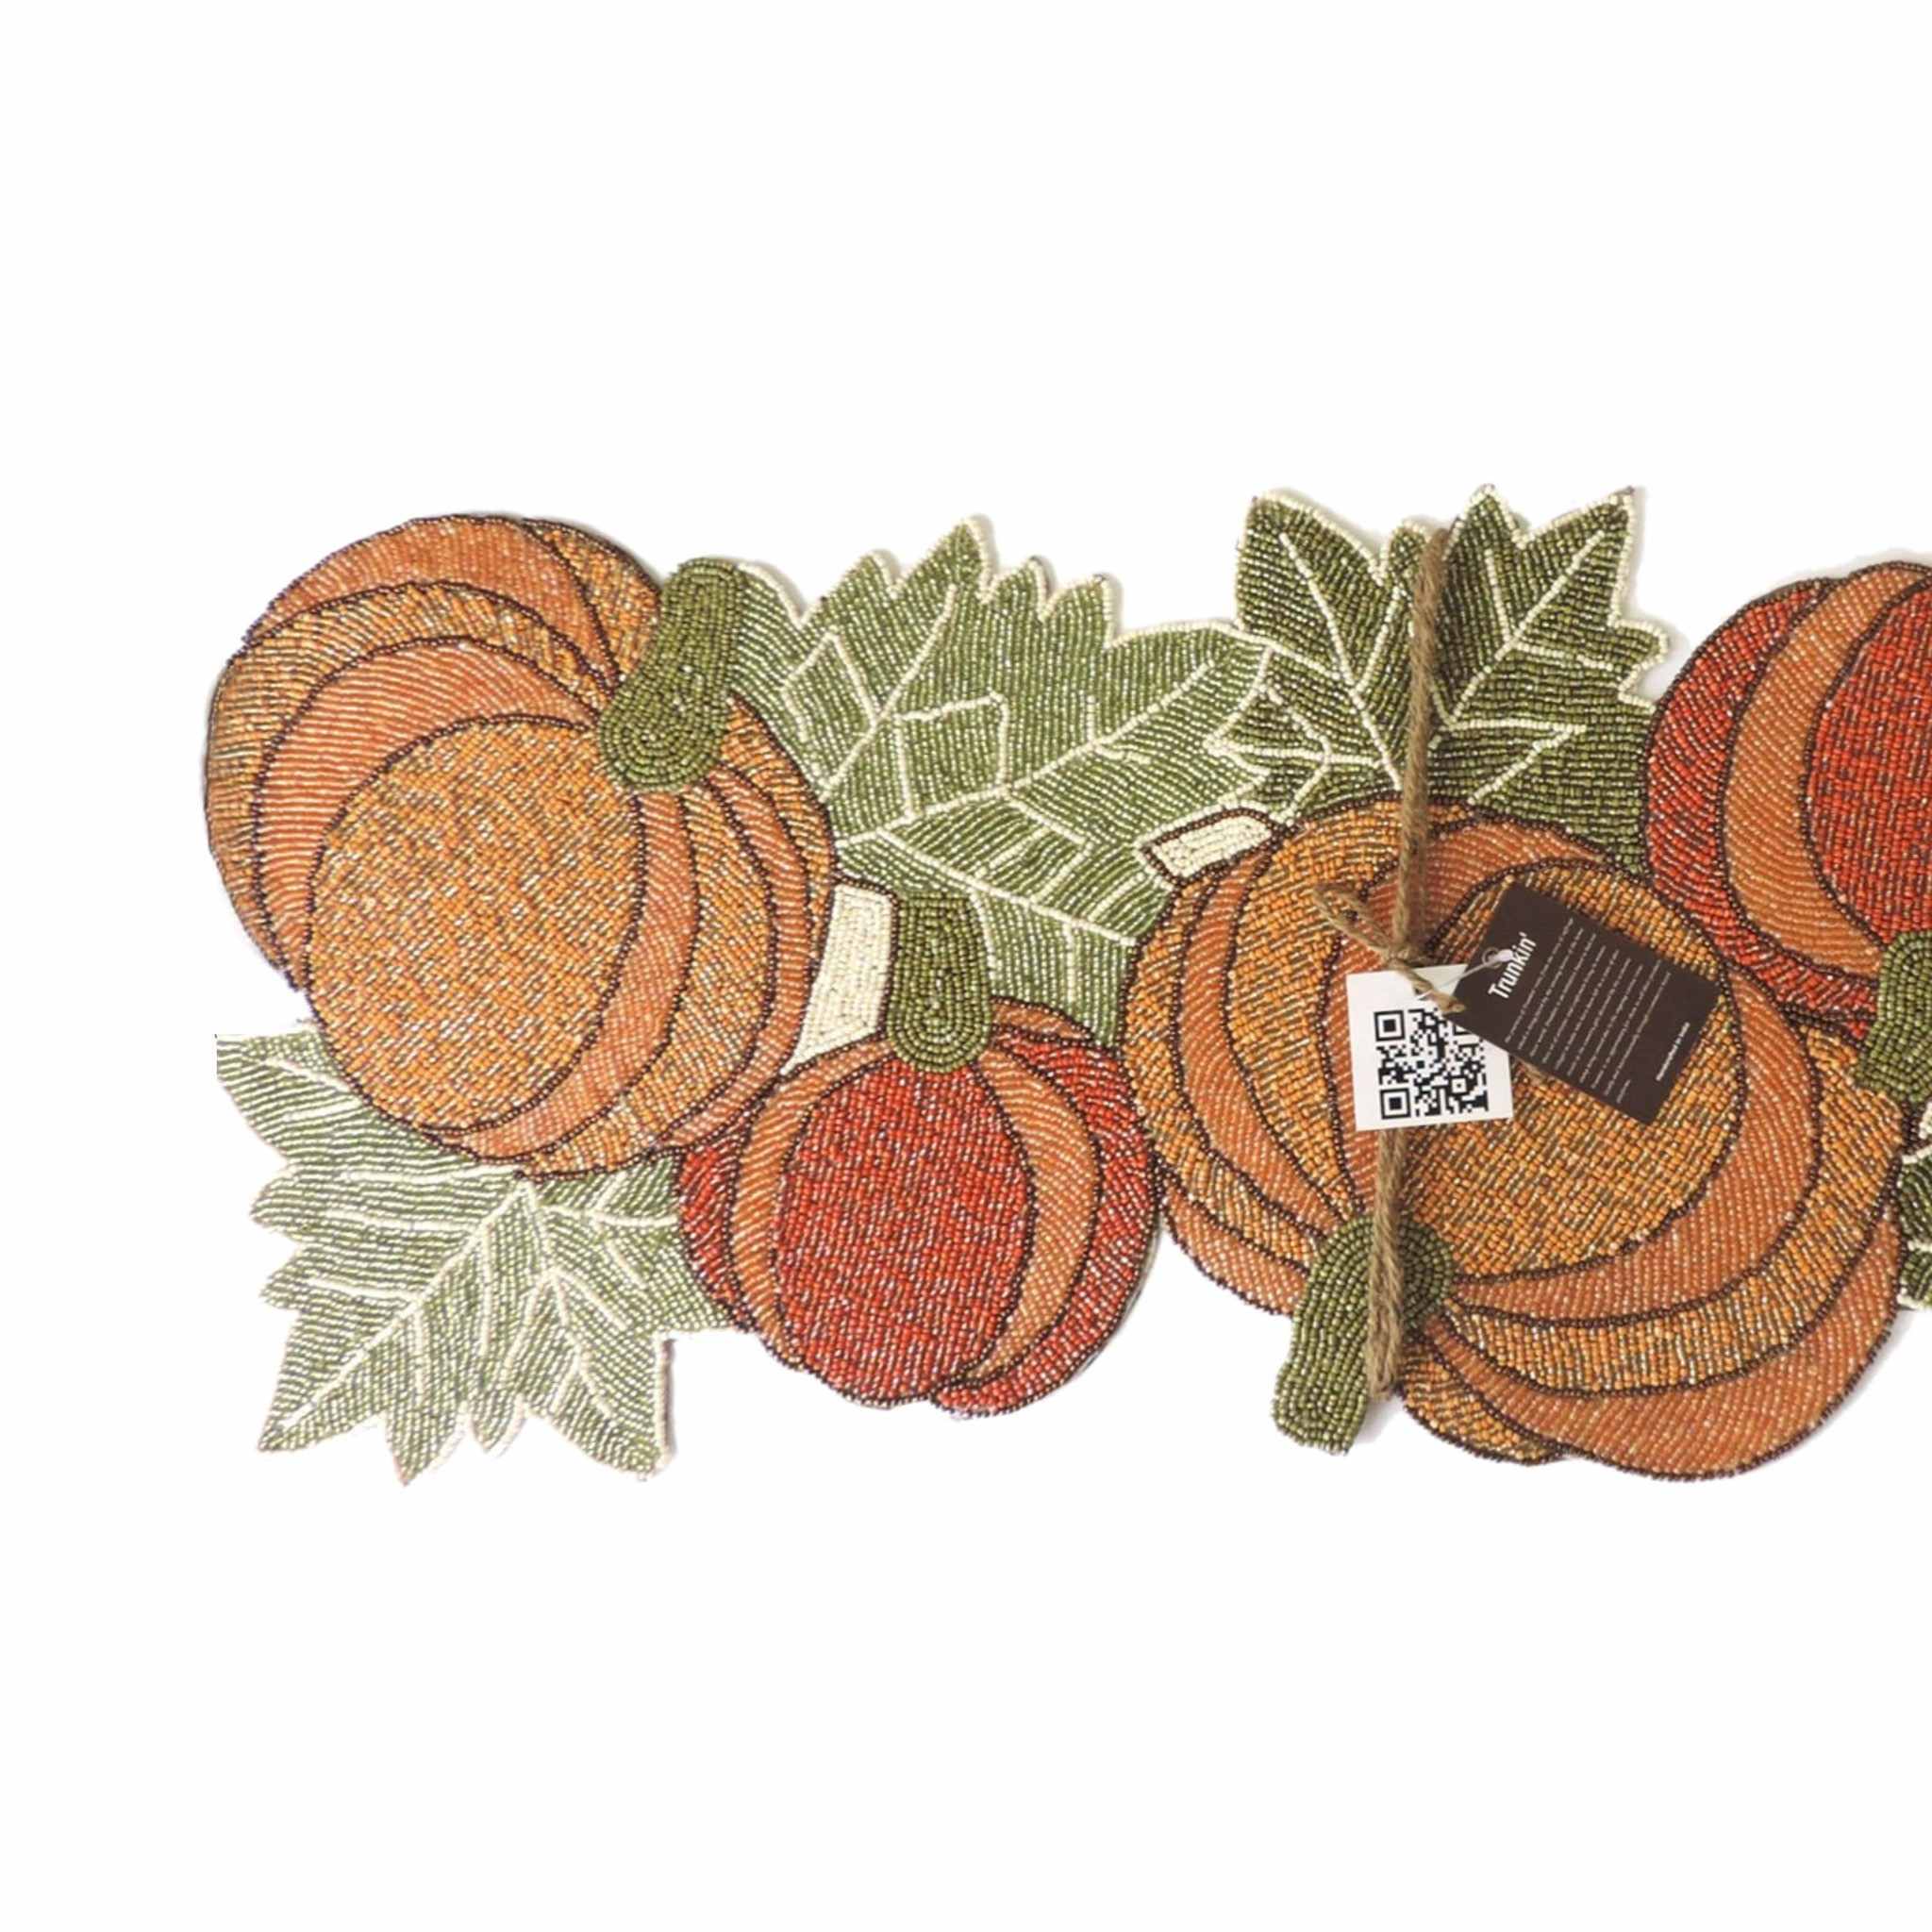 Harvest Pumpkin Glass Bead Embroidered Table Runner in Autumn Colors